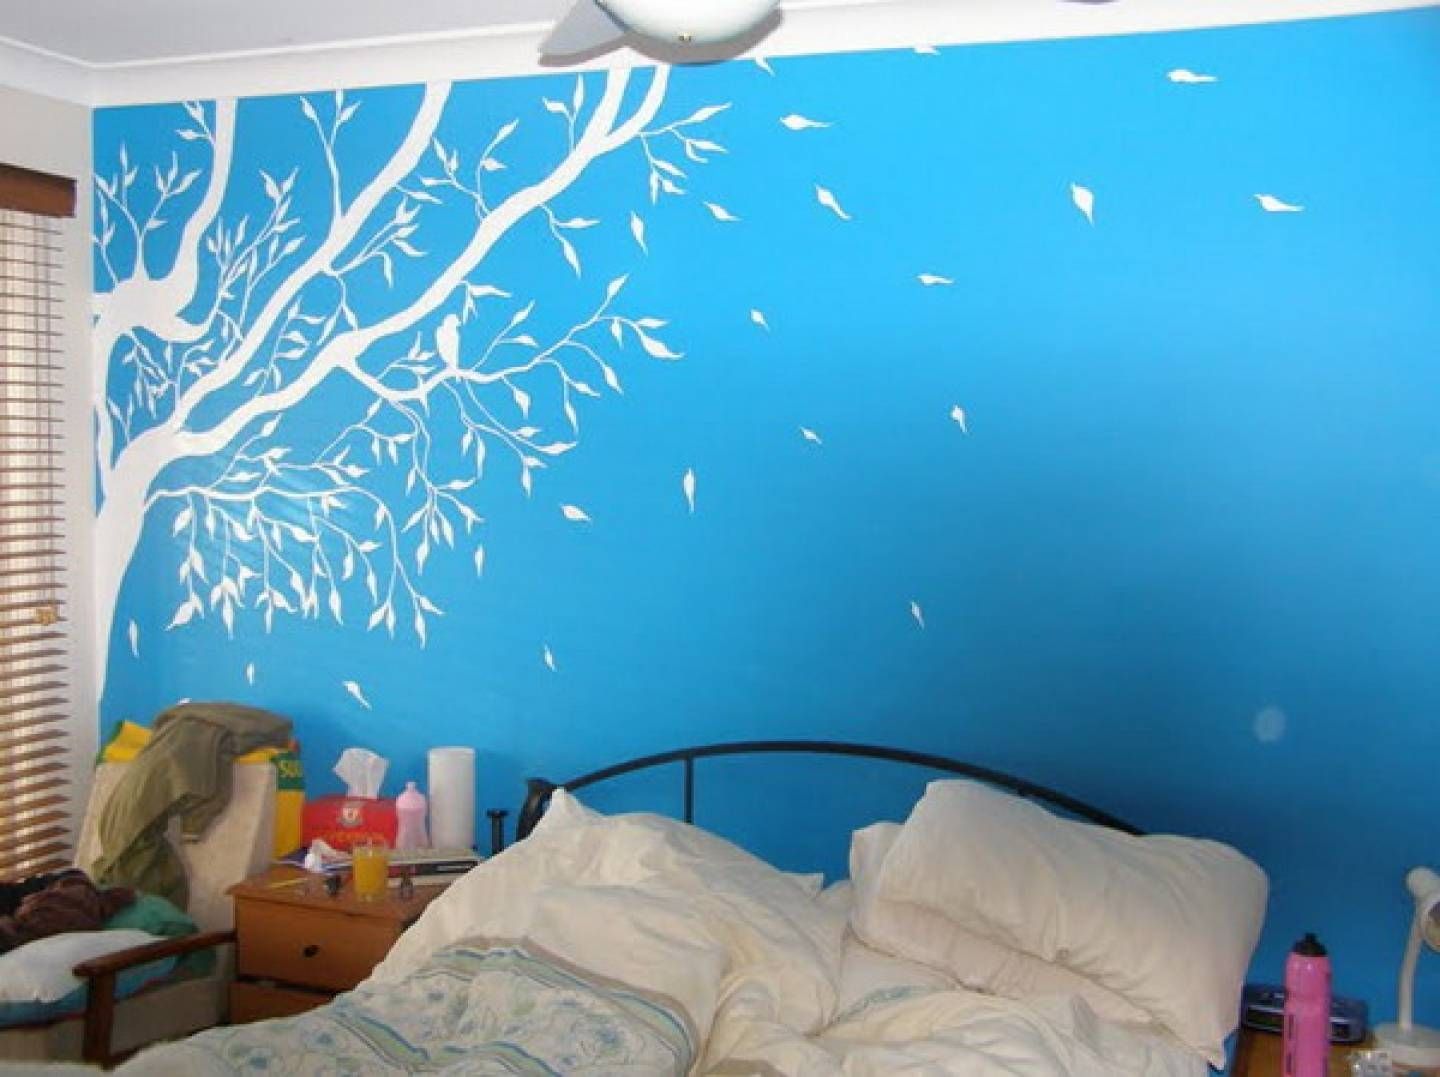 Wall Painting Ideas Blue Schemes Bedroom Blue Walls With White Within Most Up To Date Painted Trees Wall Art (Gallery 19 of 20)